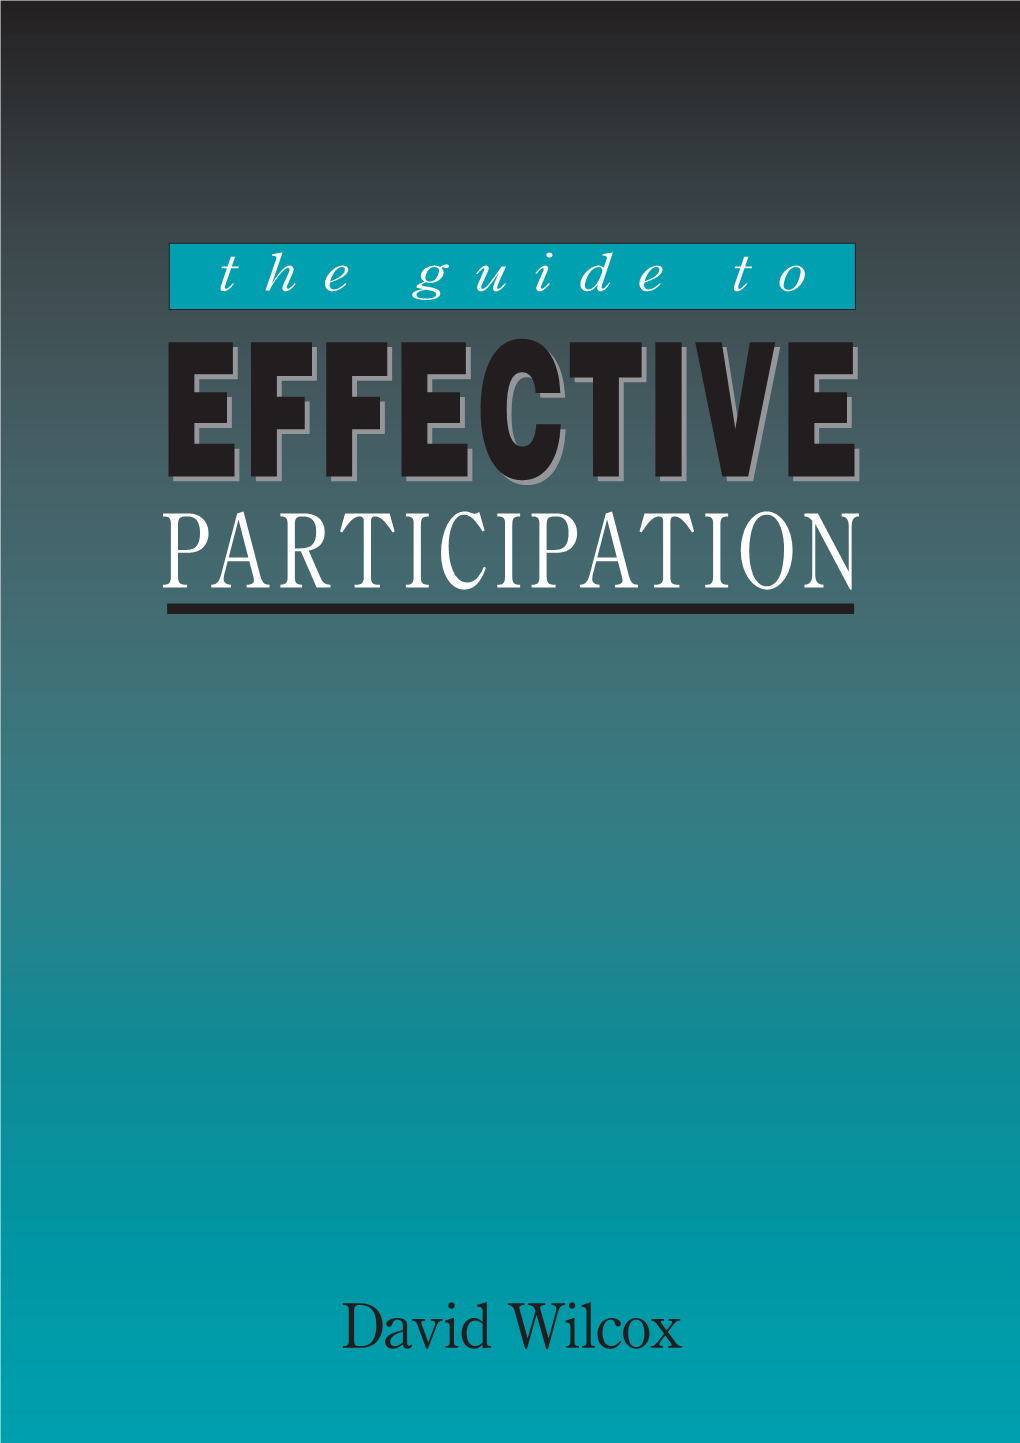 The Guide to Effective Participation, Published in 1994, Is Now out of Print